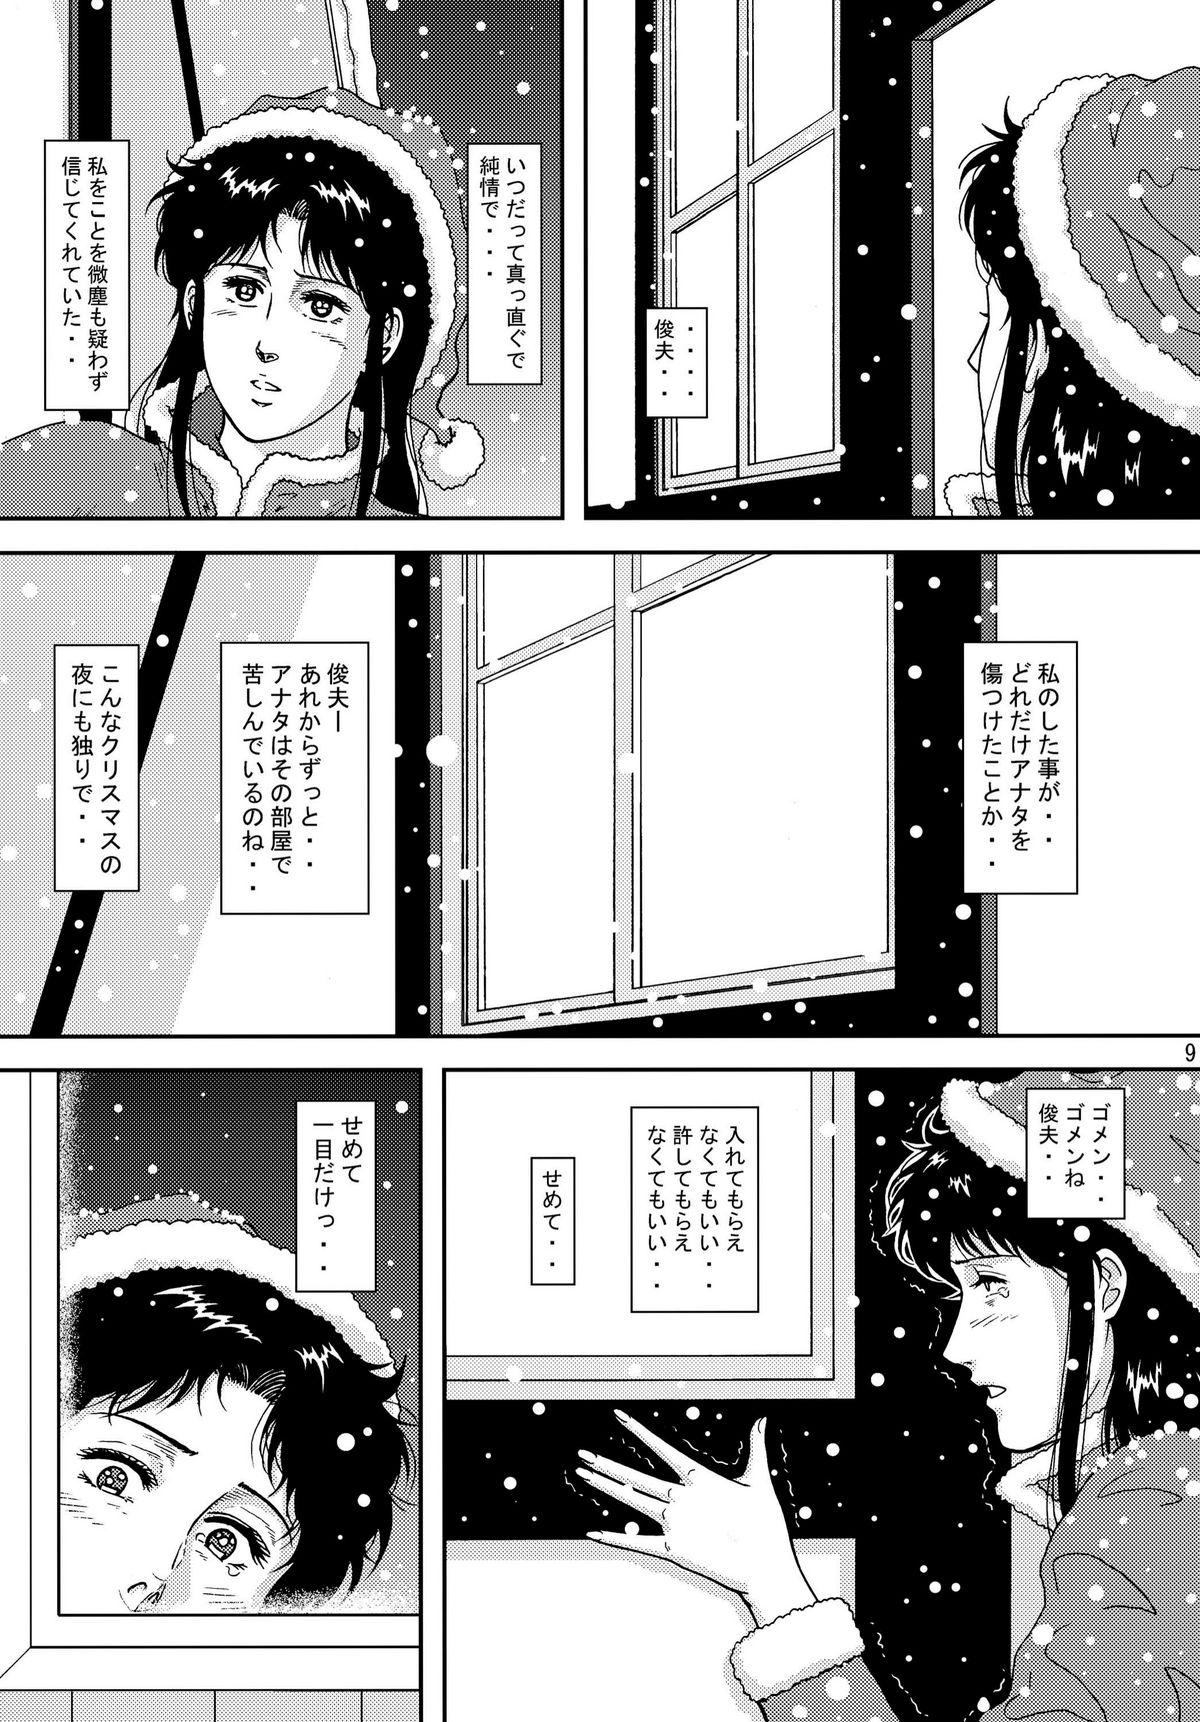 Negra NIGHTFLY vol.10 PLEASE COME HOME for X'mas - Cats eye Bath - Page 9